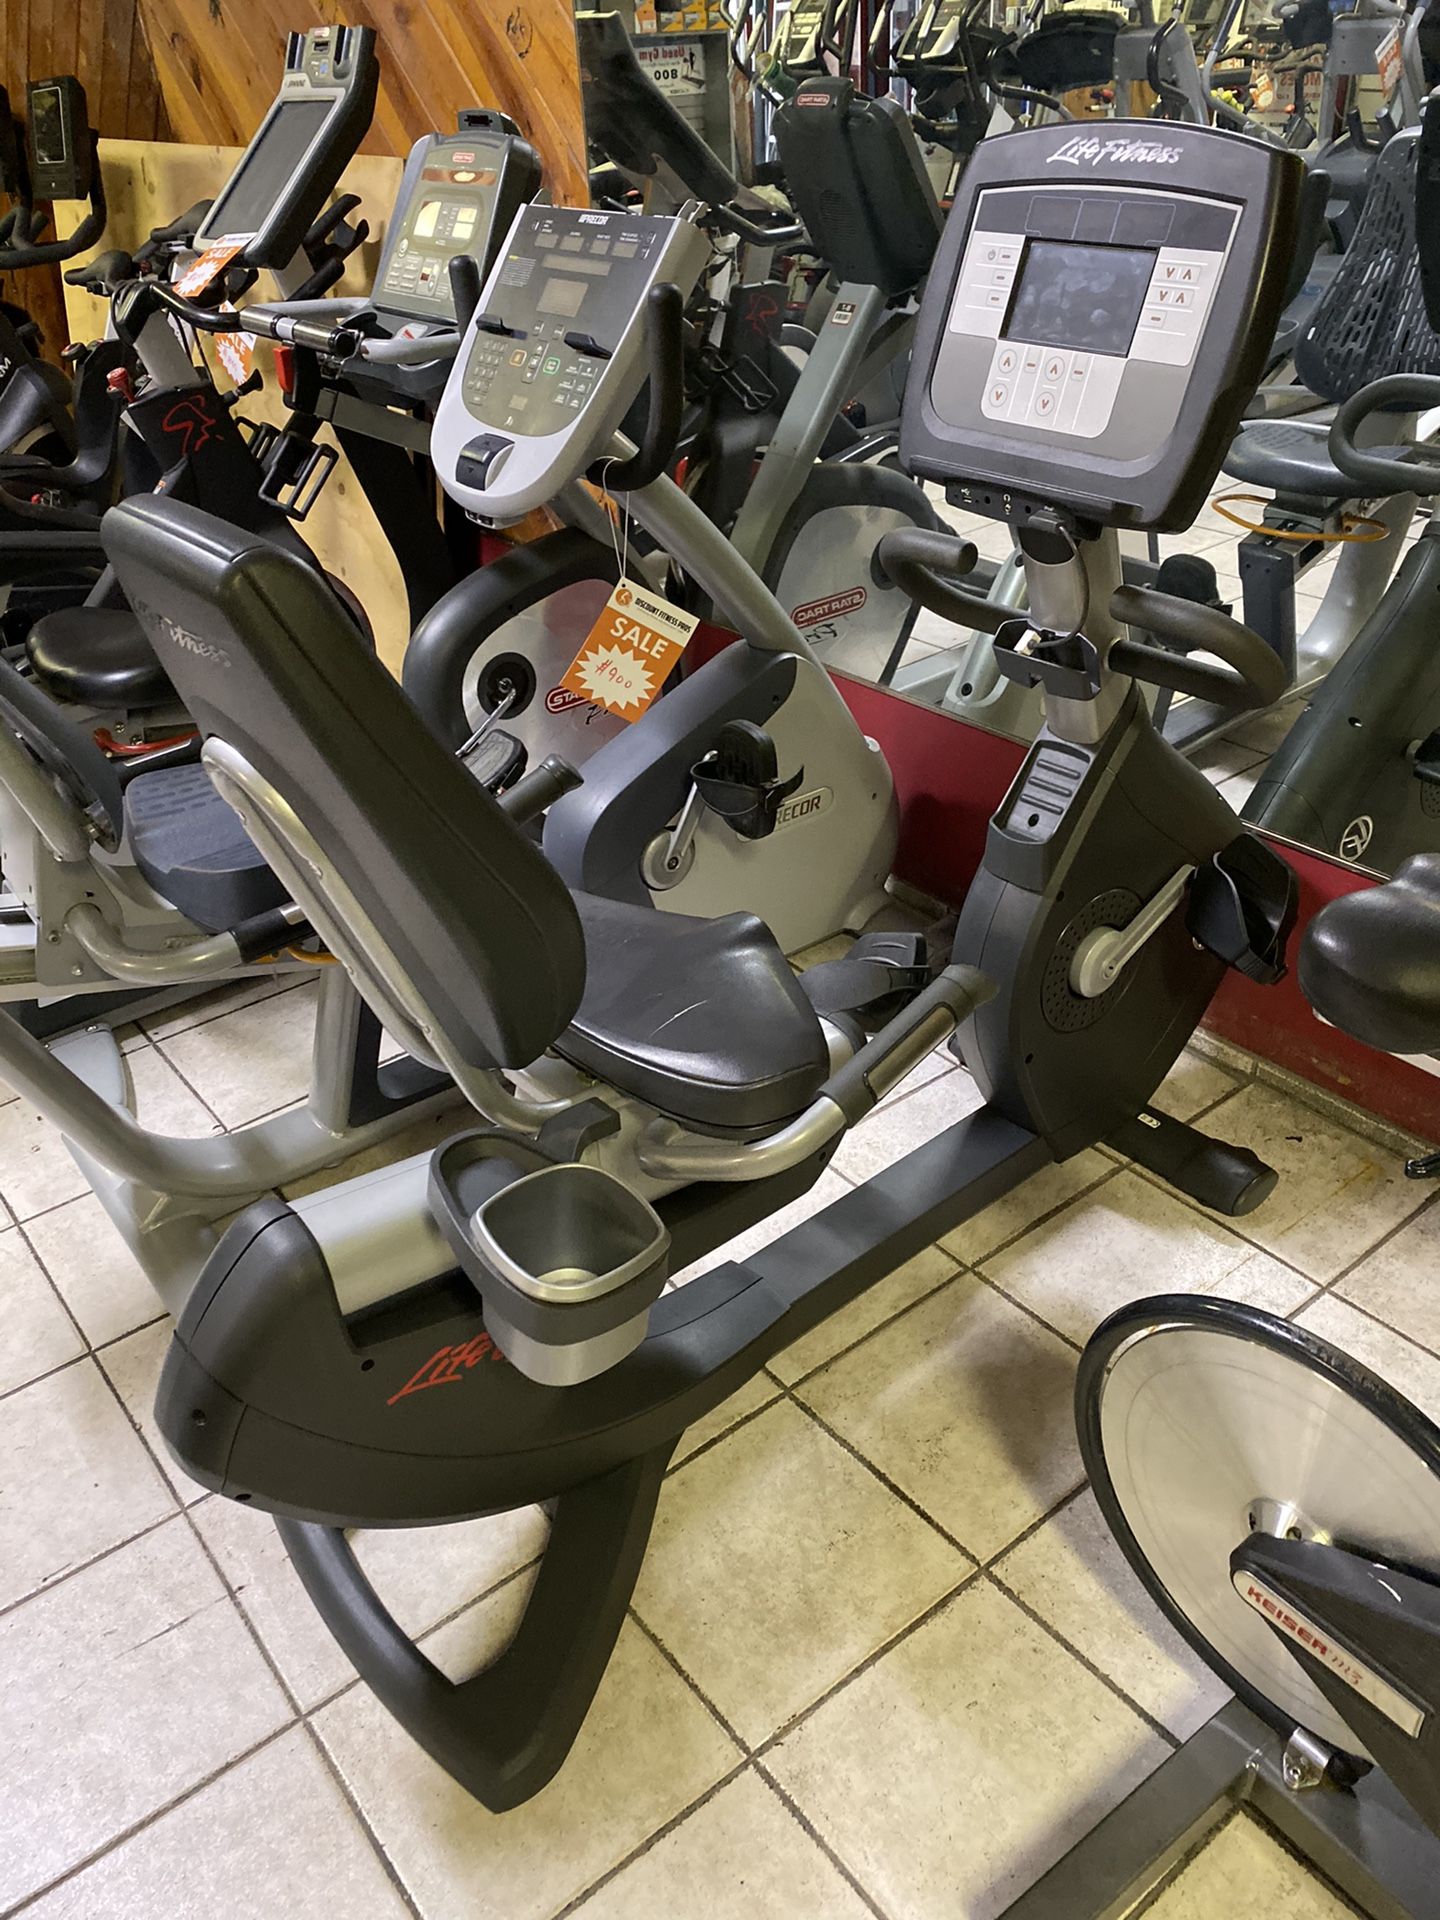 Life Fitness Lifecycle Recumbent Exercise Bike works and looks great!